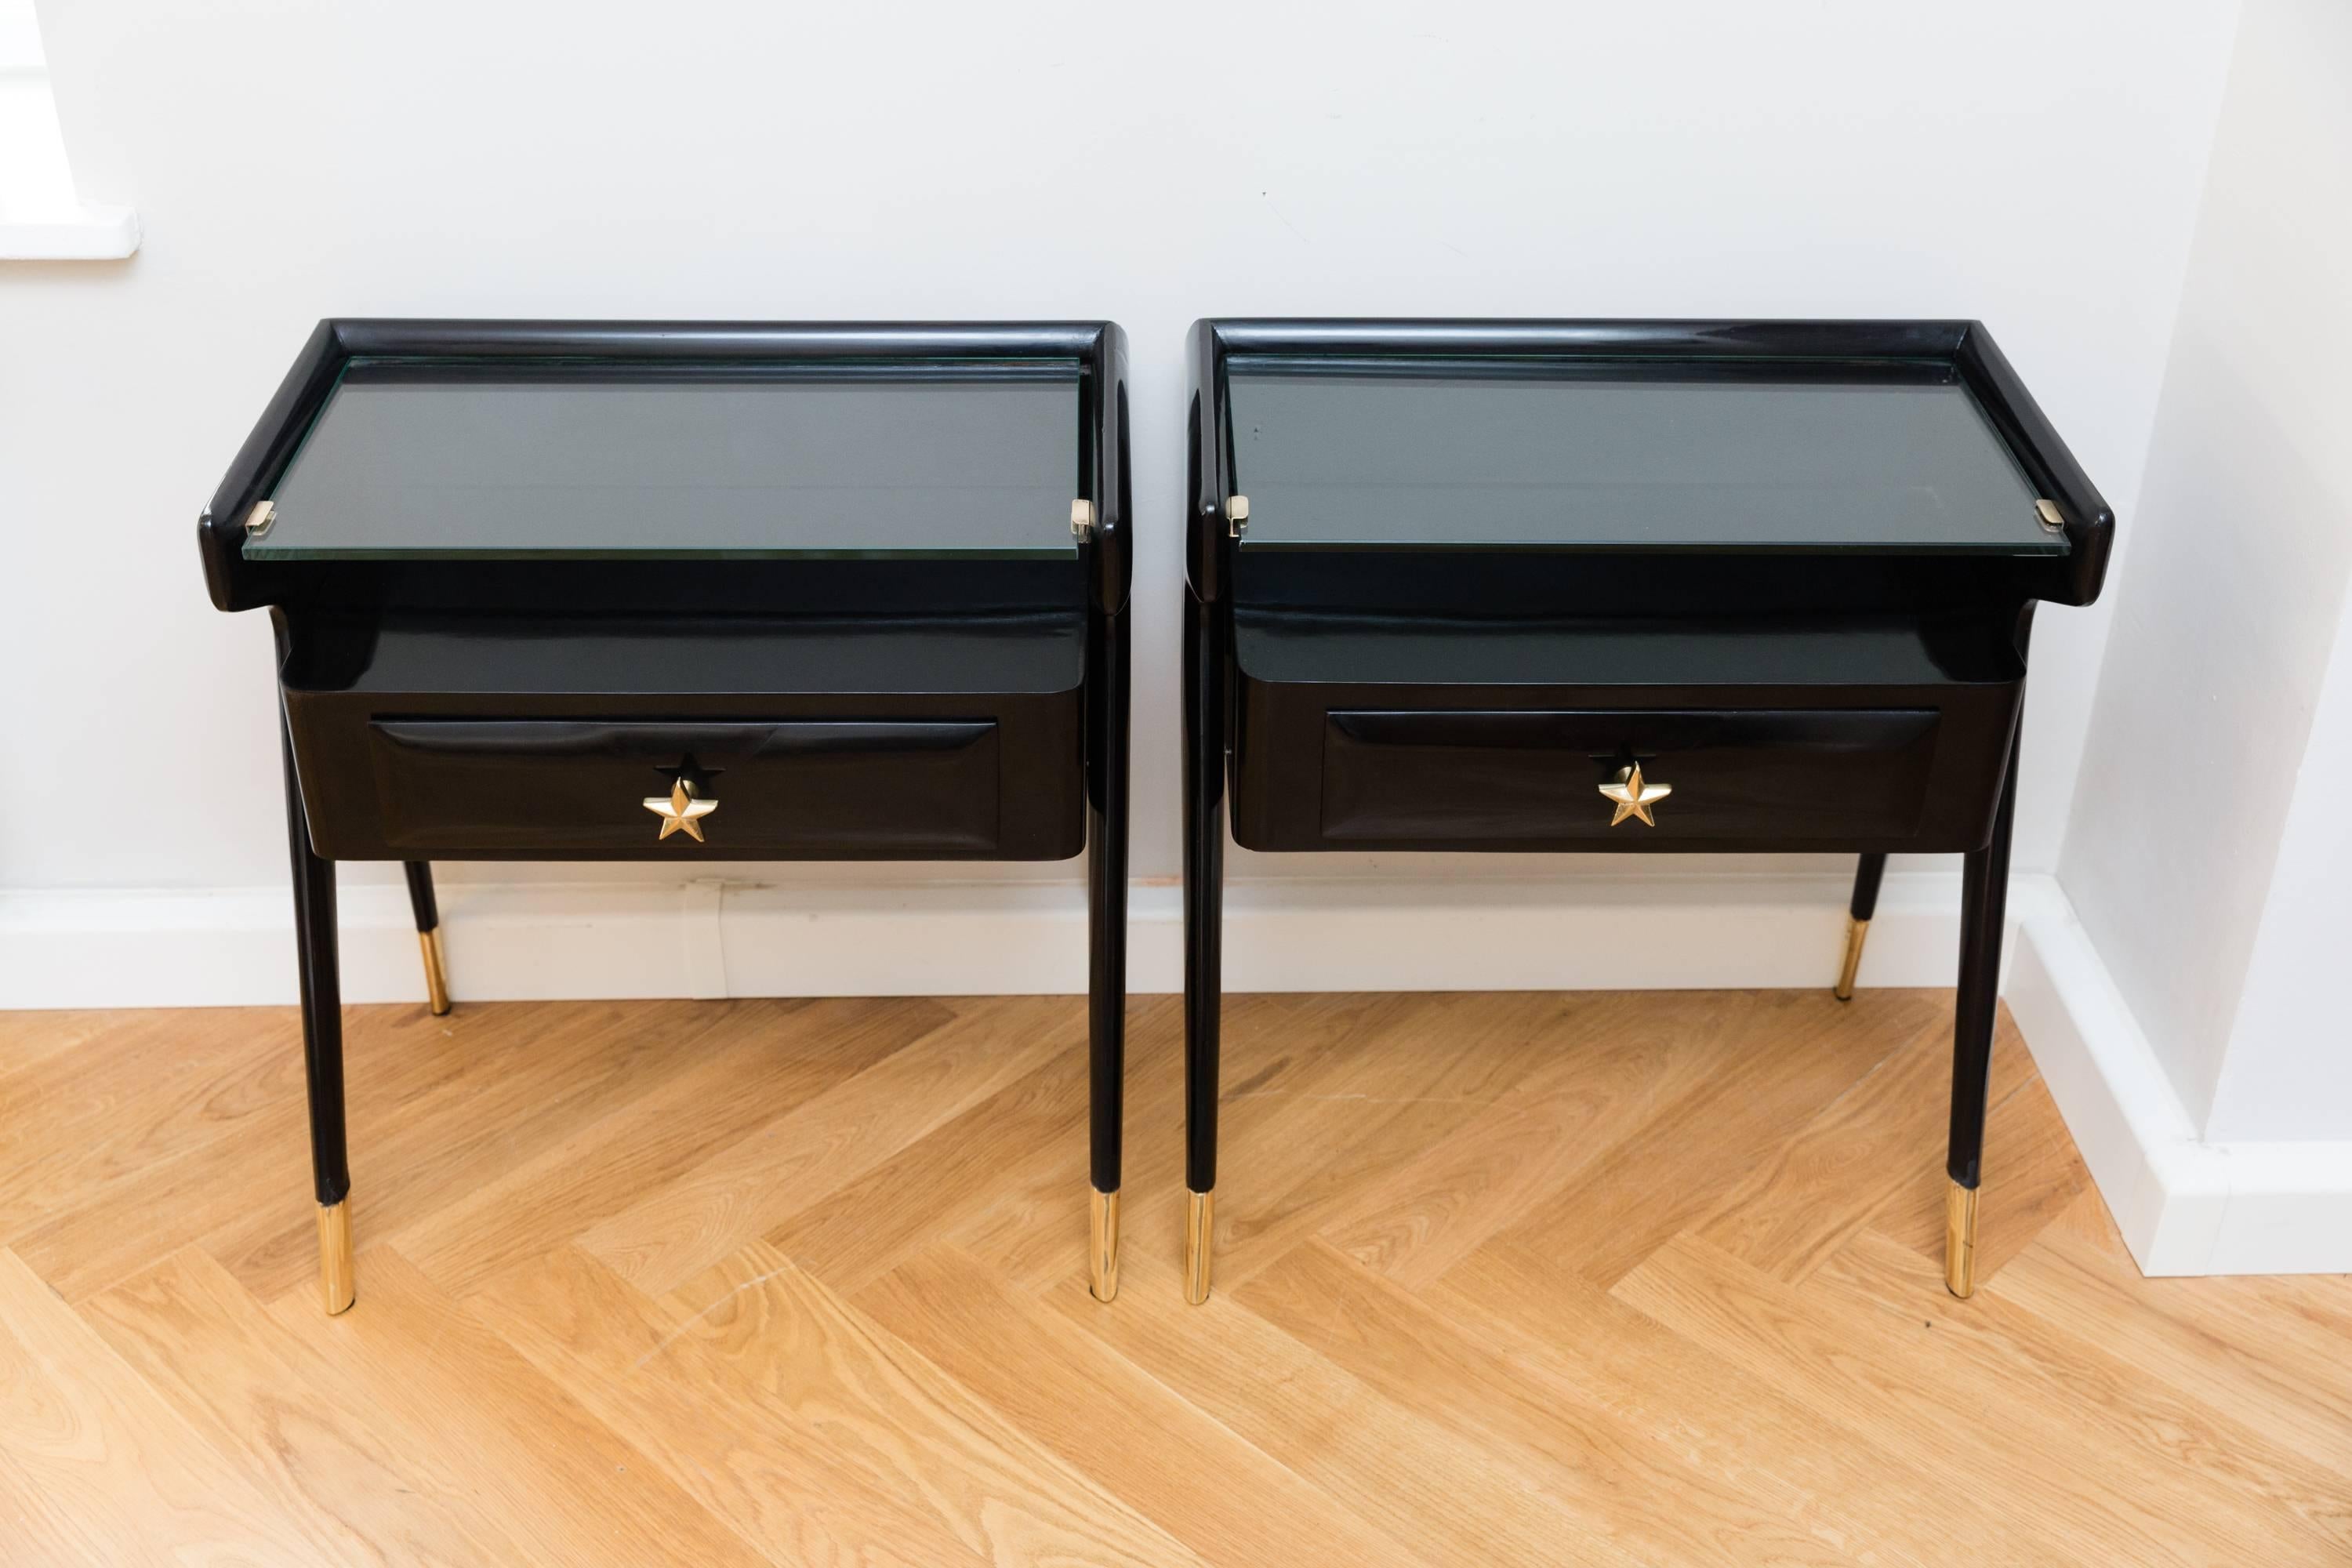 Pair of Side Tables, Italy, circa 1950 (Mitte des 20. Jahrhunderts)